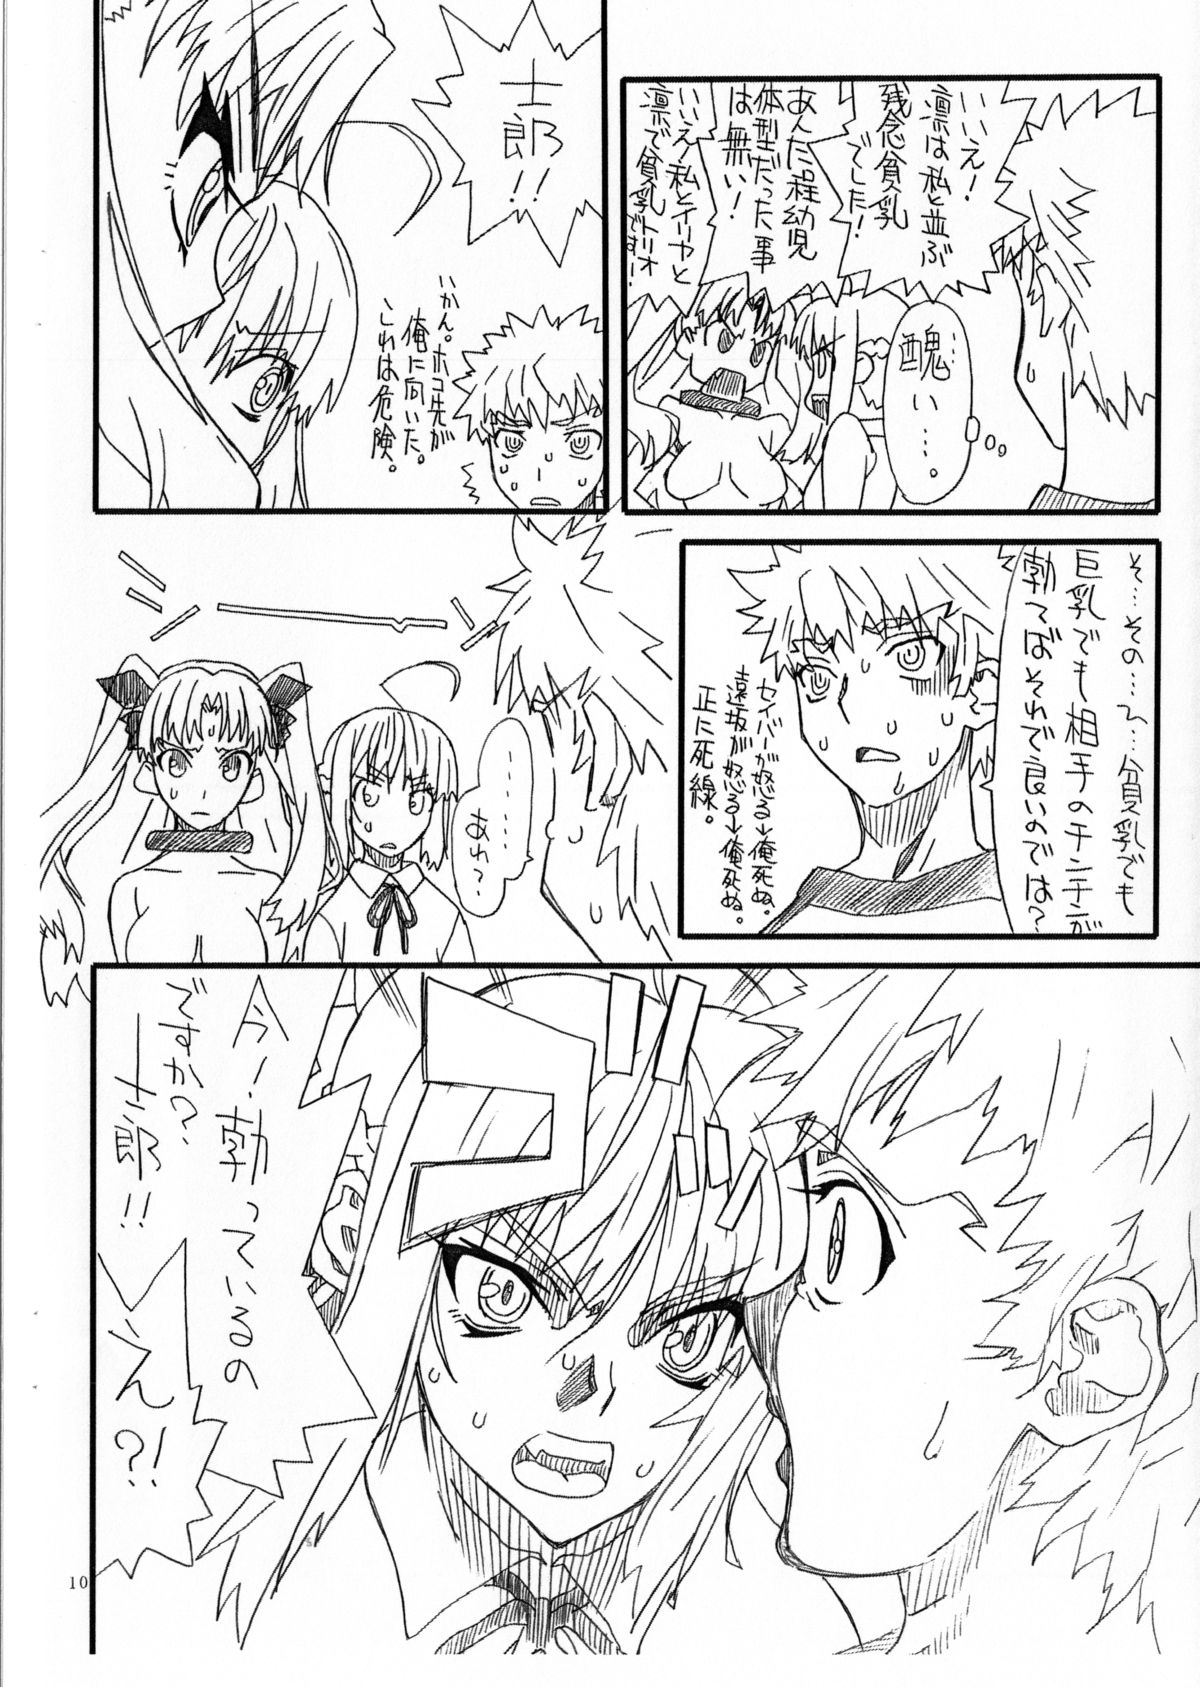 (SC65) [Power Slide (Uttorikun)] Rin to saber 1st Ver0.5 (Fate/stay night) page 11 full